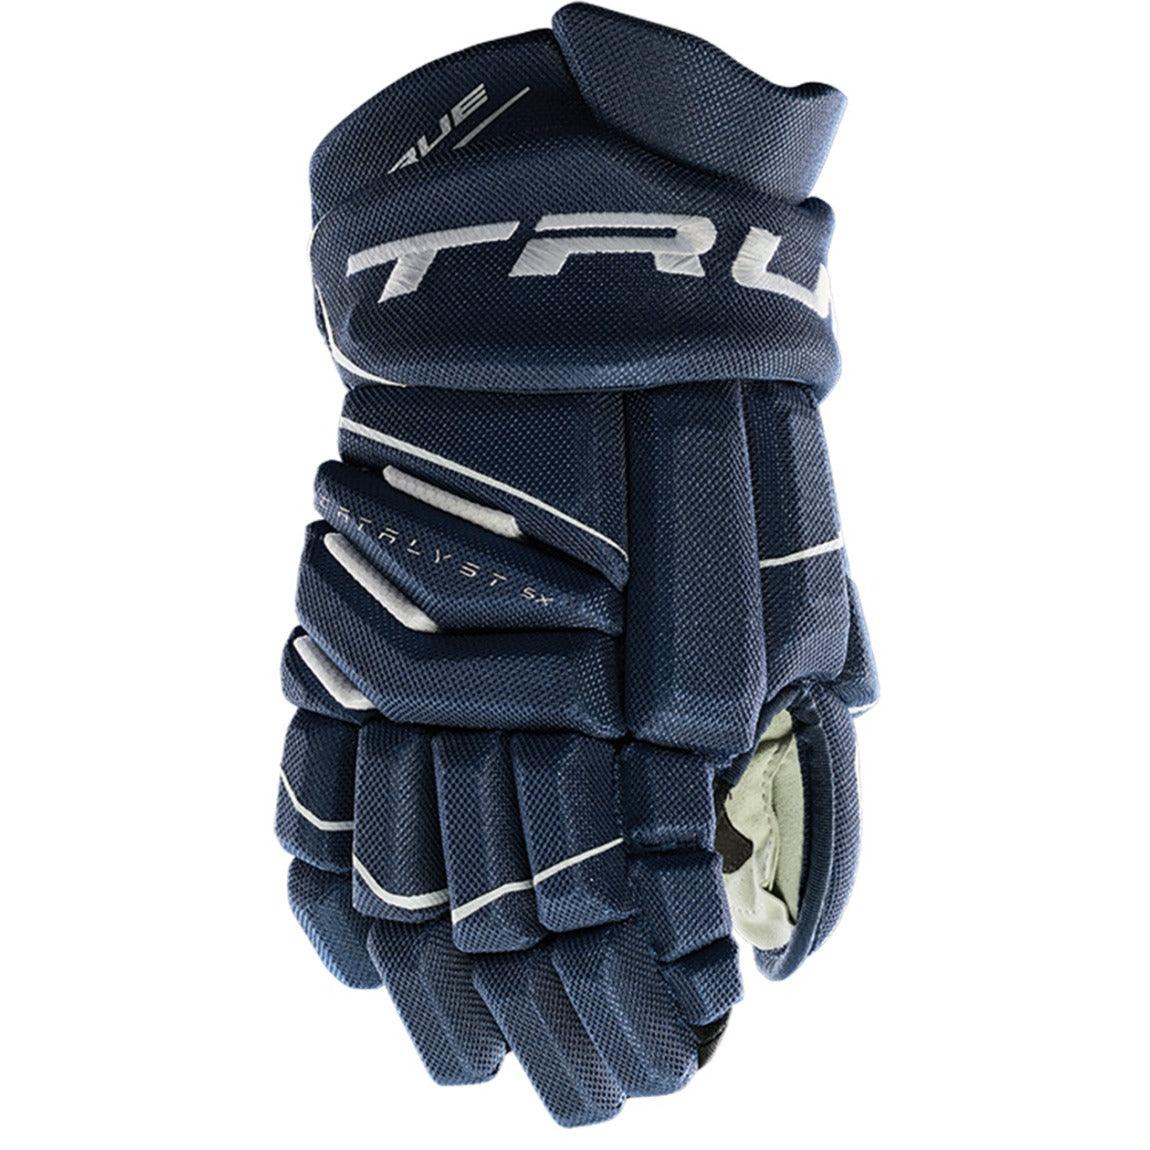 CATALYST 5 Tapered Glove - Sports Excellence